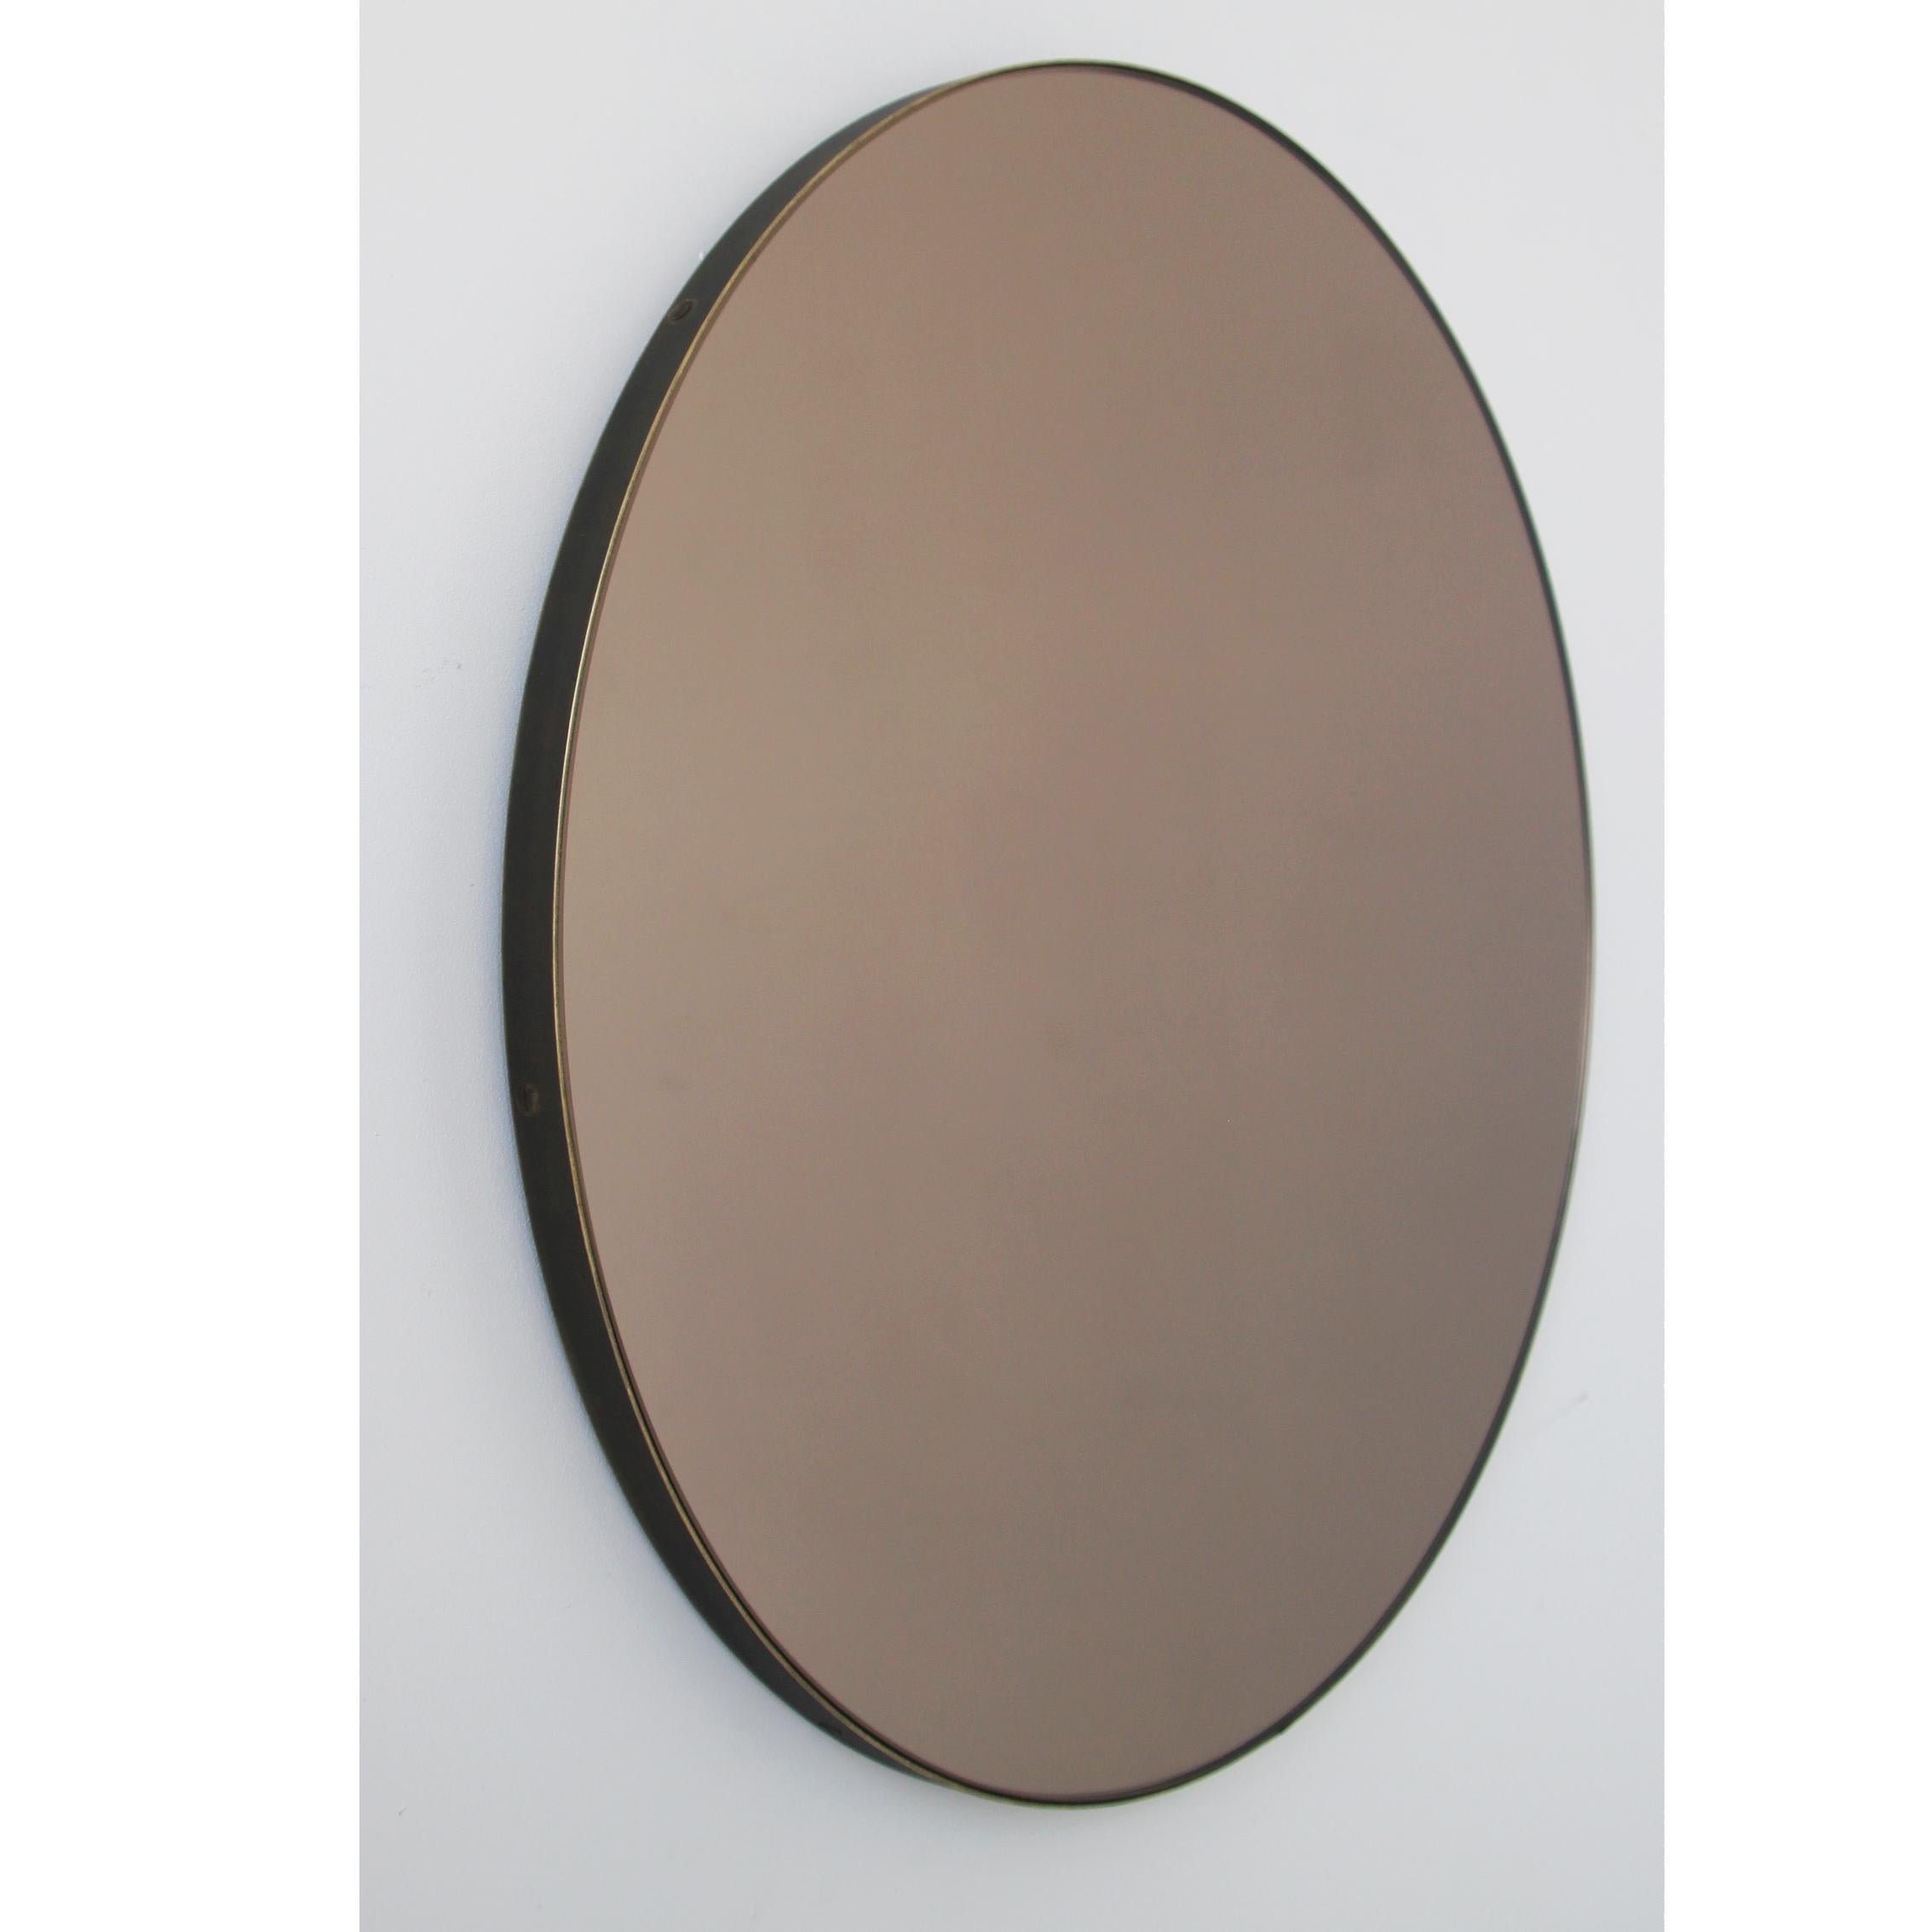 Contemporary bronze tinted Orbis™ round mirror with a solid brass frame with a bronze patina finish. Designed and handcrafted in London, UK.

Medium, large and extra-large mirrors (60, 80 and 100cm) are fitted with an ingenious French cleat (split